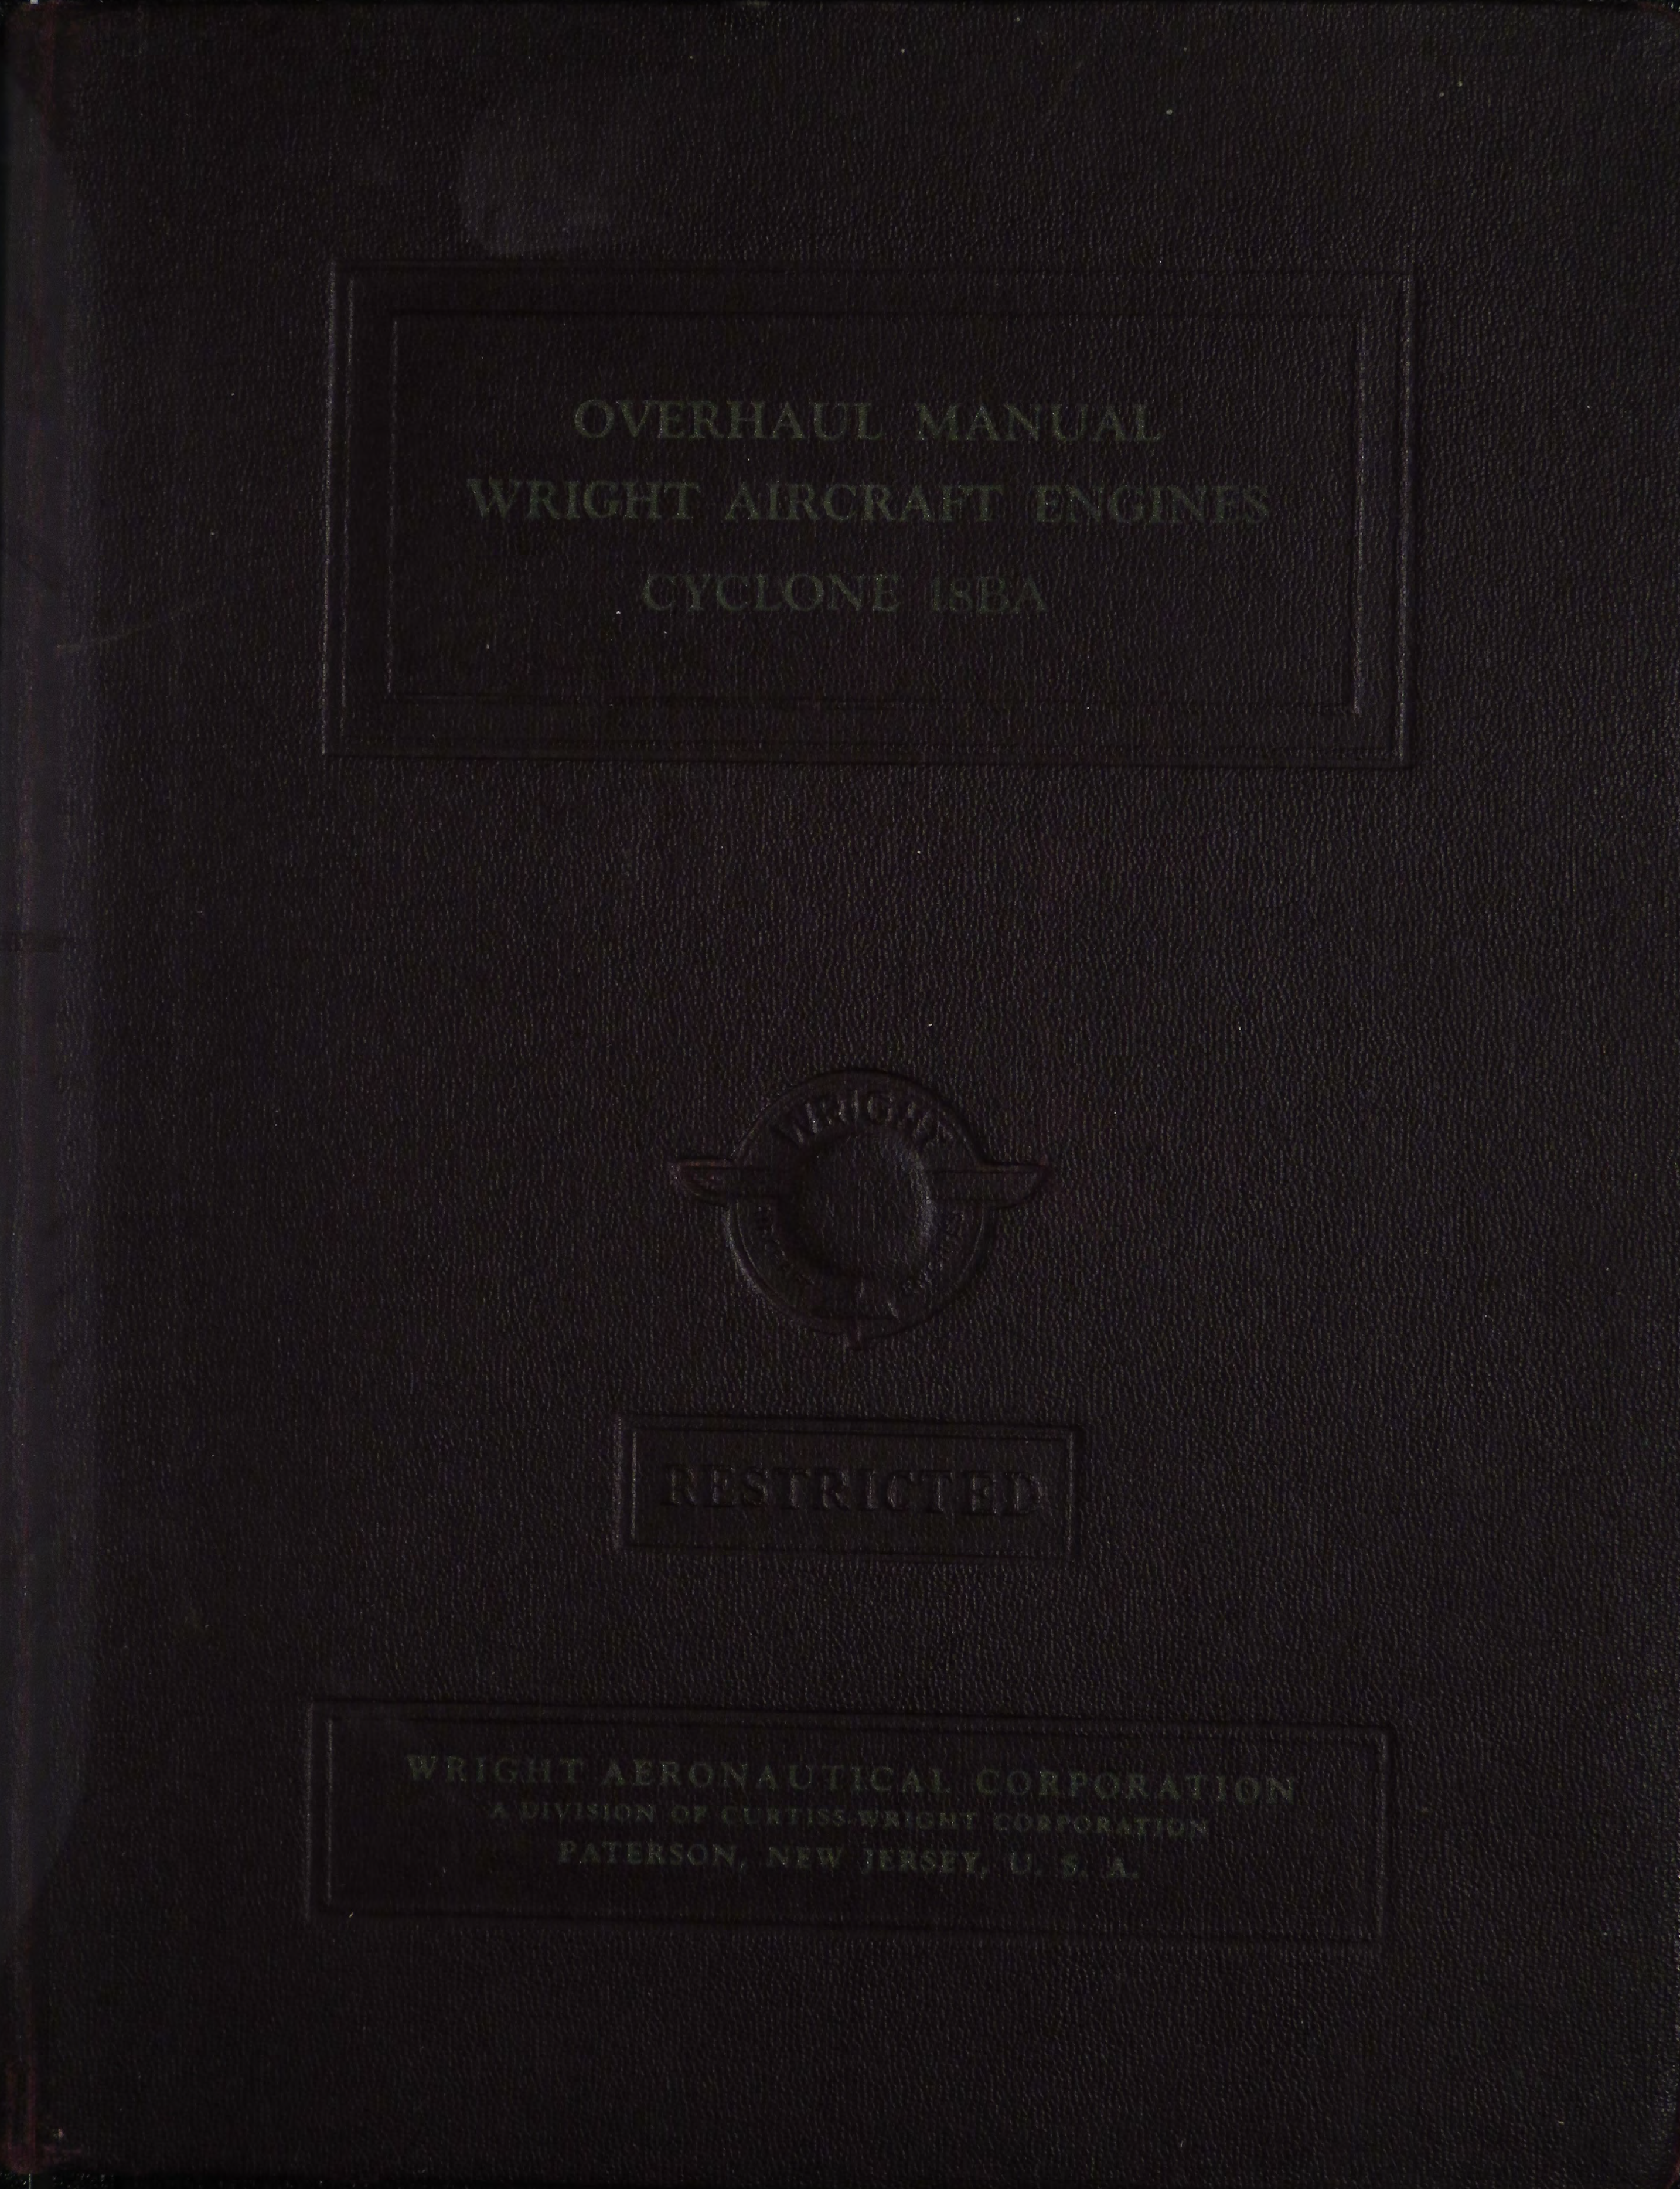 Sample page 1 from AirCorps Library document: Overhaul Manual for Wright Aircraft Engines - Cyclone 18BA